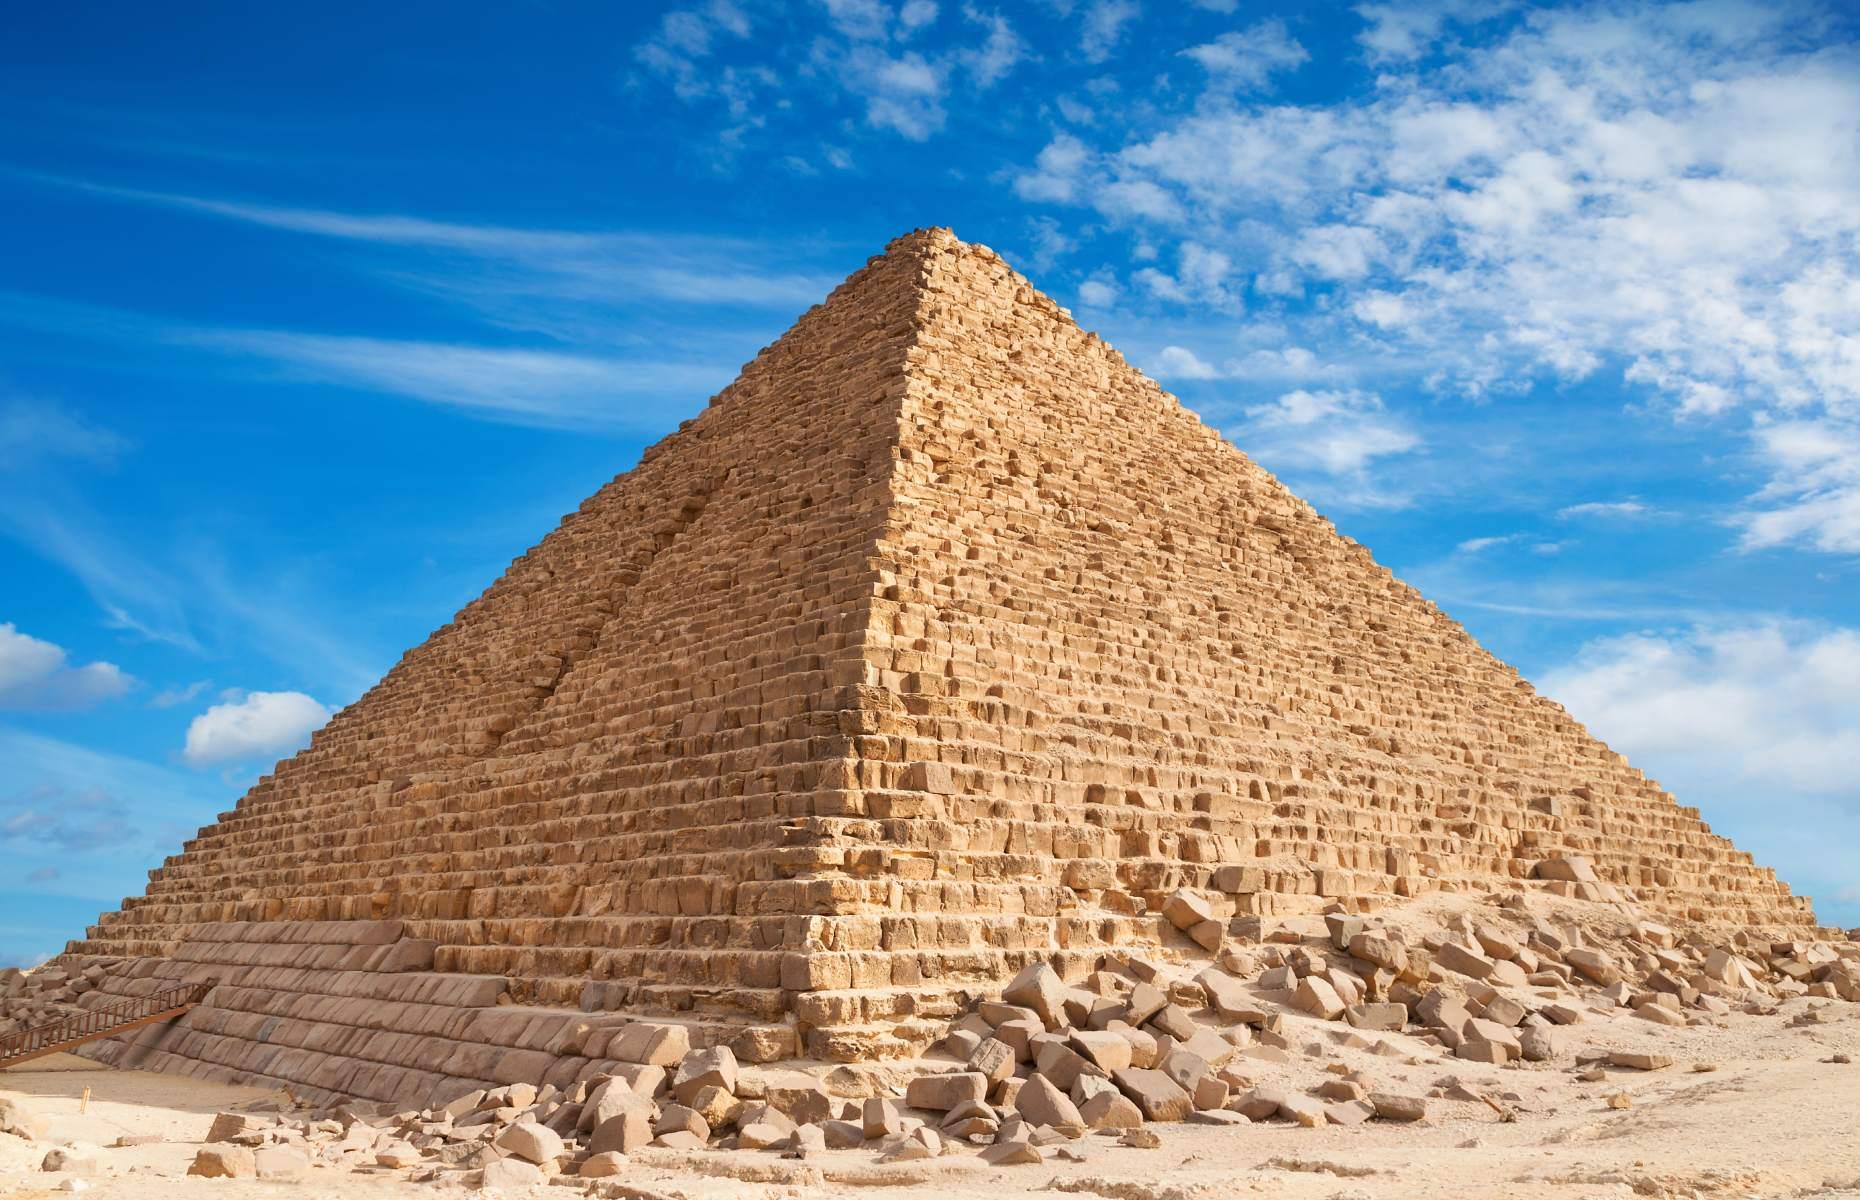 <p>The Great Pyramids of Giza complex consists of three pyramids, each named after the king they contained: Khufu, Khafre and Menkaure. Khufu Pyramid is the largest of the three, standing at a height of 482 feet (147m). It was constructed between 2550 and 2490 BC, using a whopping 2.3 million stone blocks. Khufu ruled between 2589 and 2566 BC and was the second pharaoh of the Fourth Dynasty. </p>